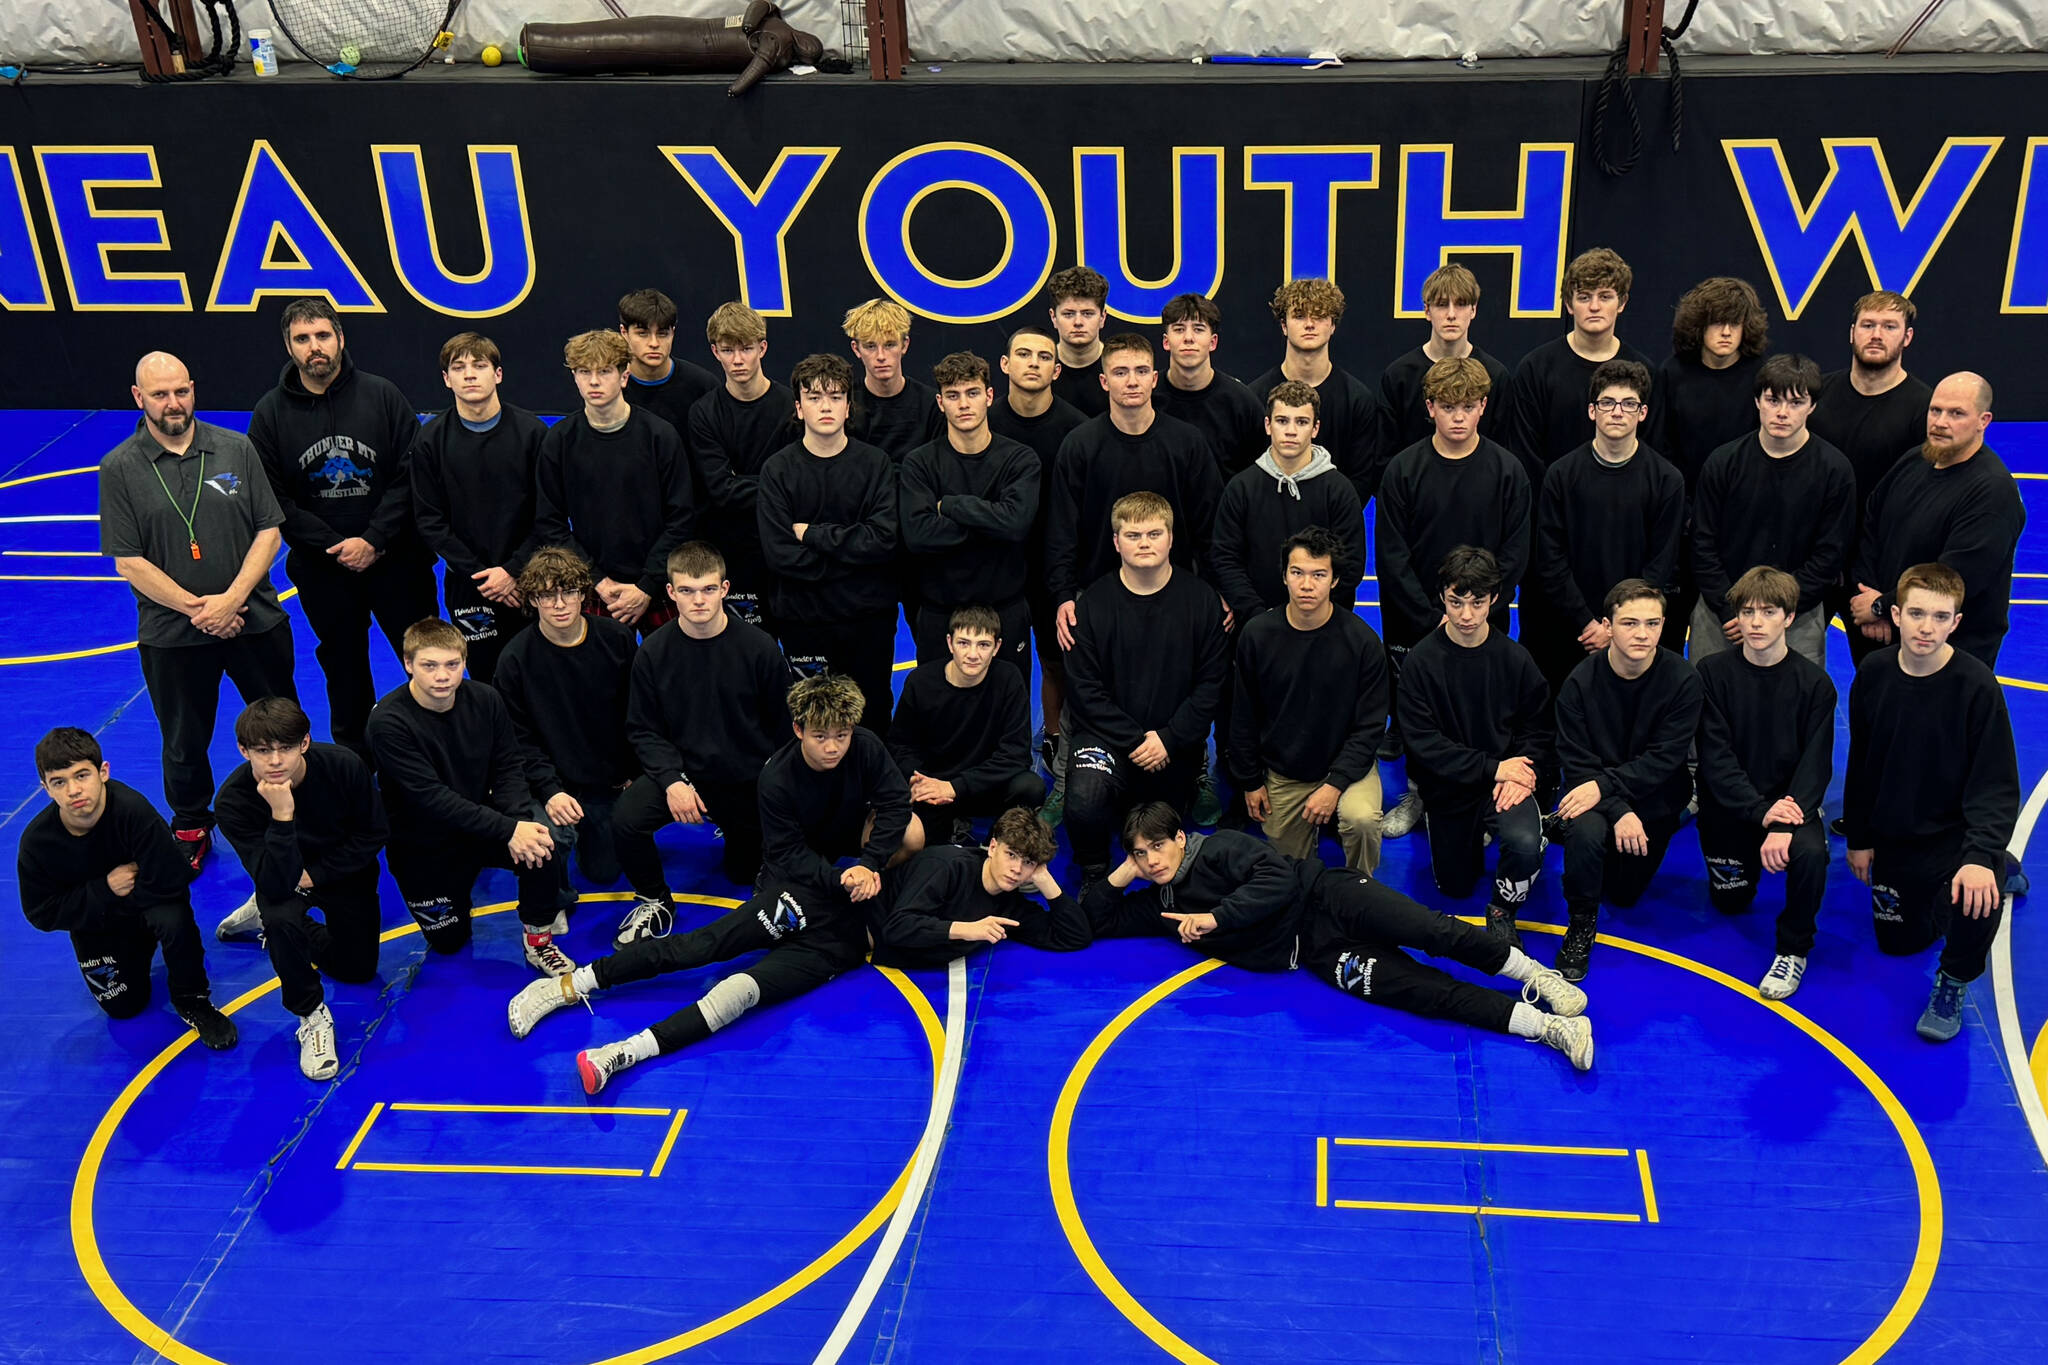 The Thunder Mountain High School wrestling team, made up of TMHS and Juneau-Douglas High School: Yadaa.at Kalé athletes, will host the Region V Wrestling Championships on Friday and Saturday in the TMHS Thunderdome gym. (Photo courtesy of TMHS)